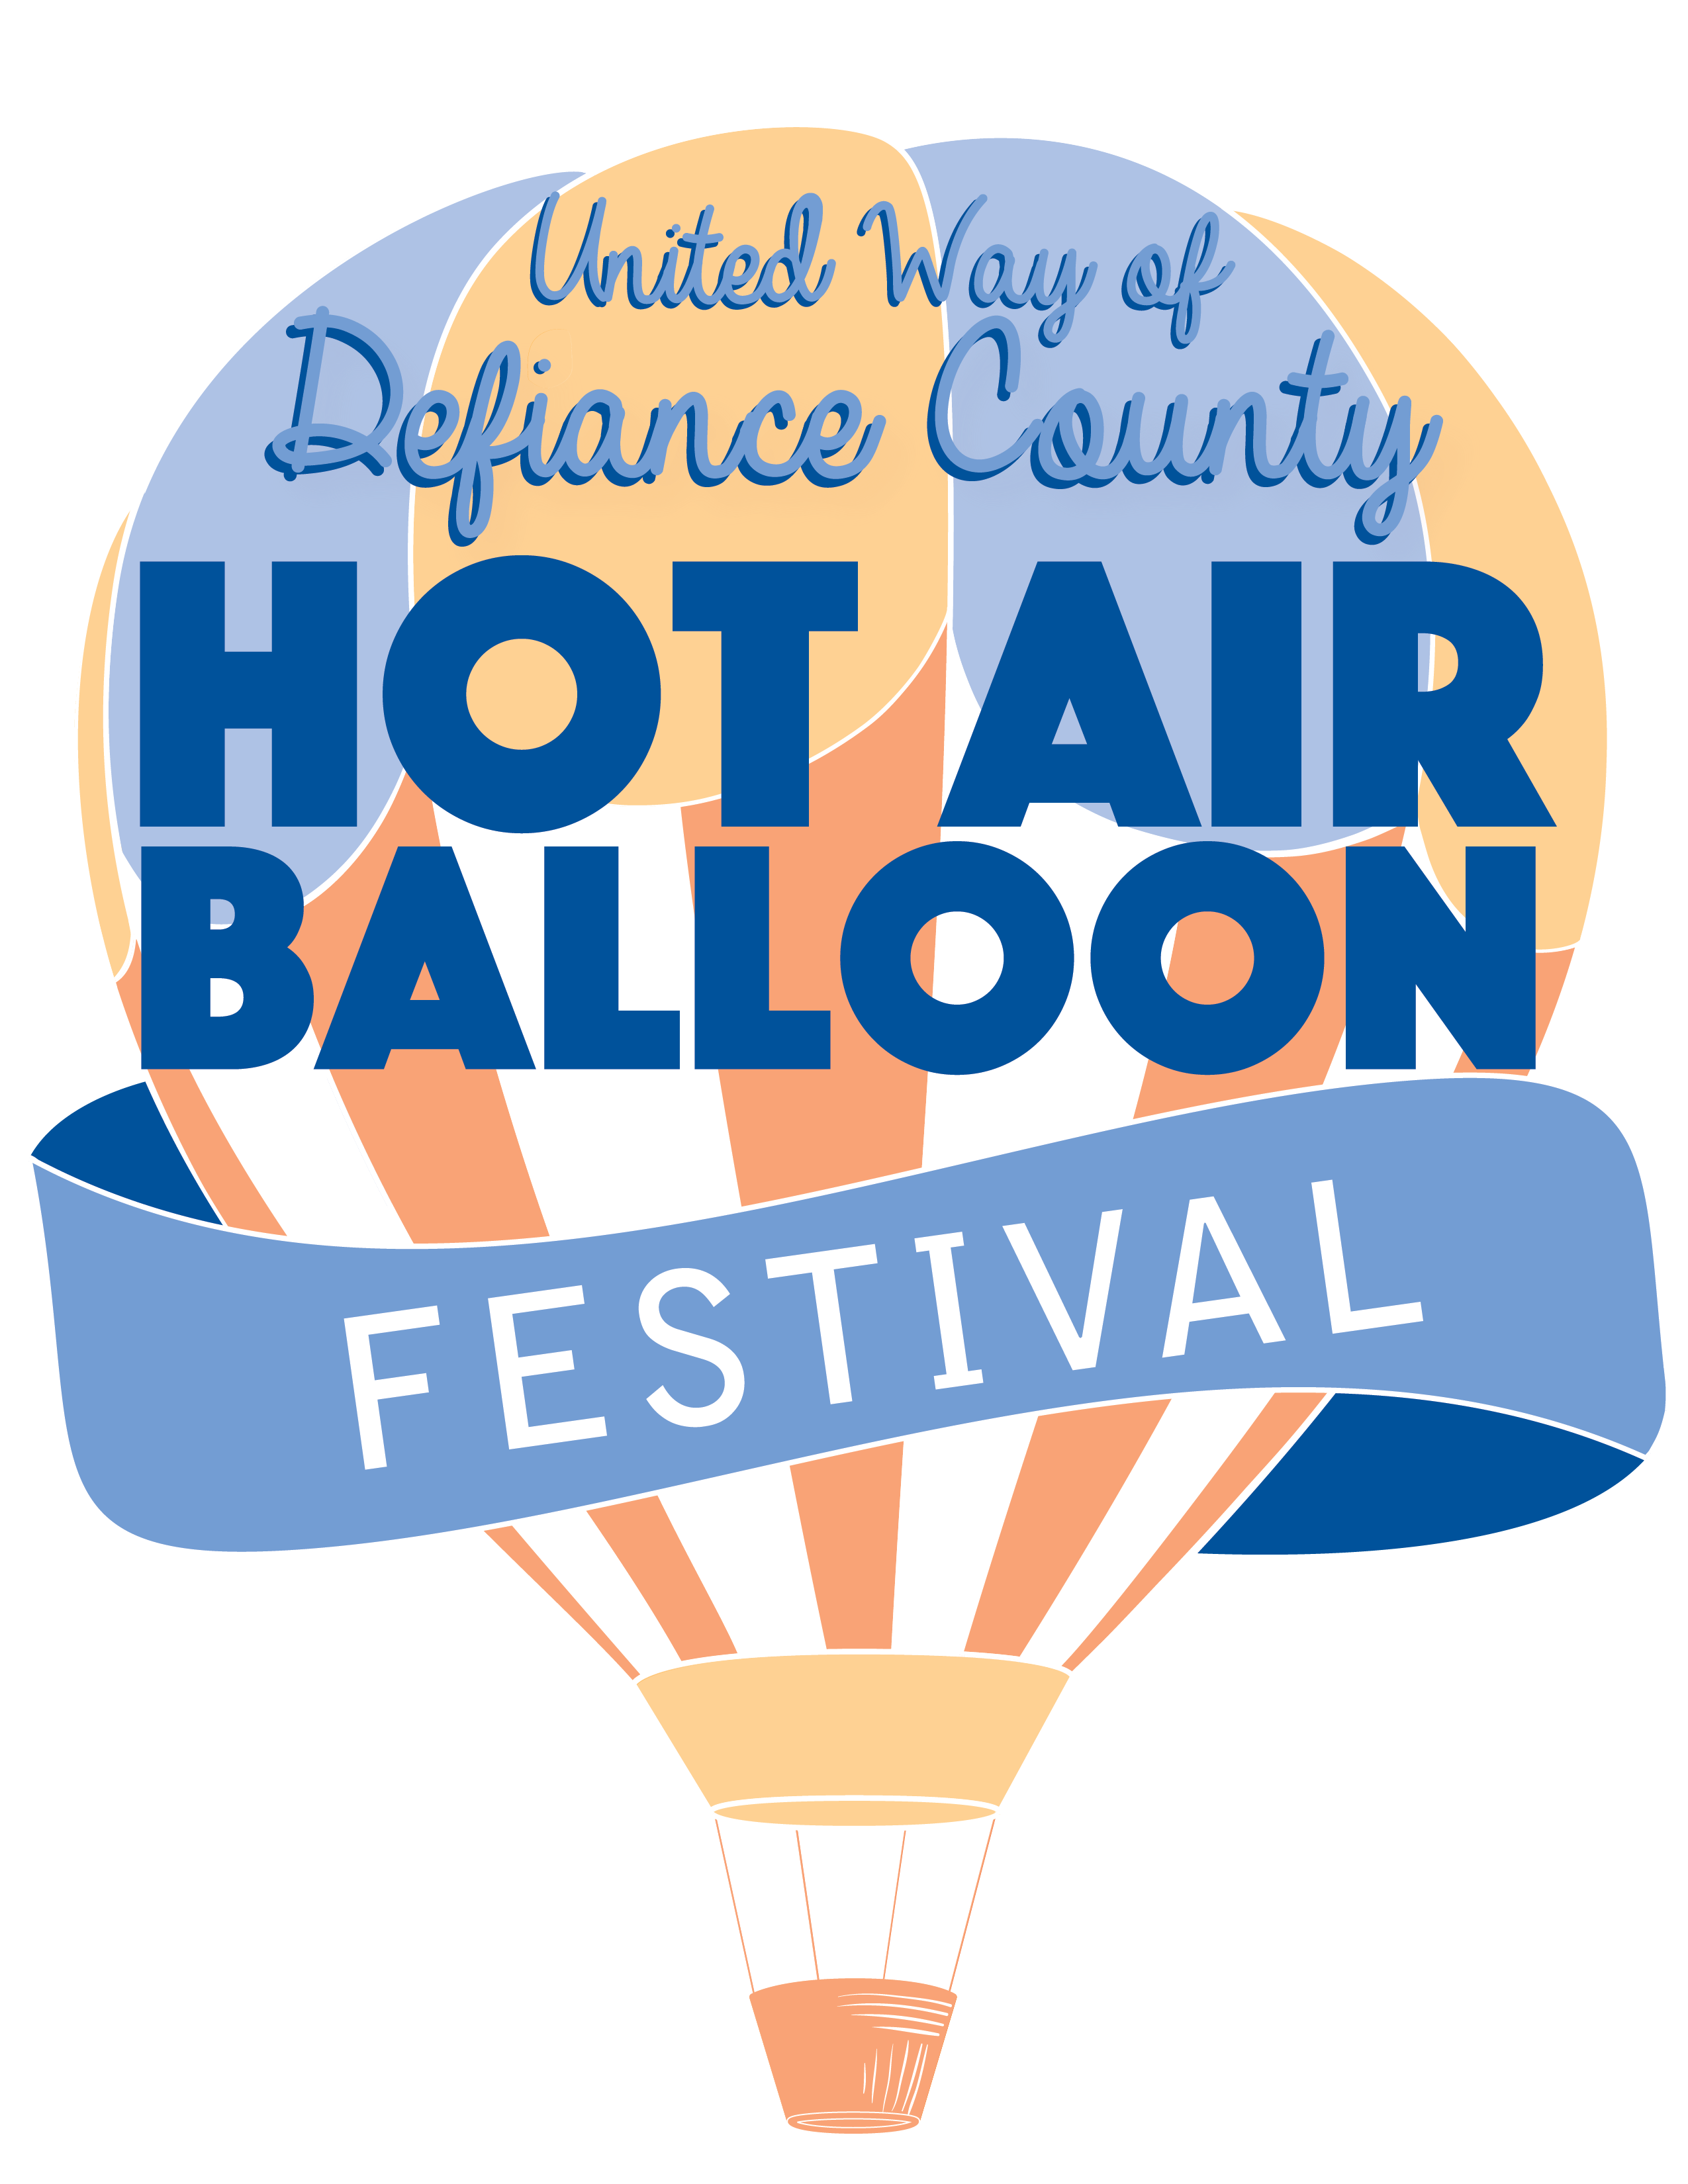 hot air balloon logo for United Way of Defiance County's balloon festival